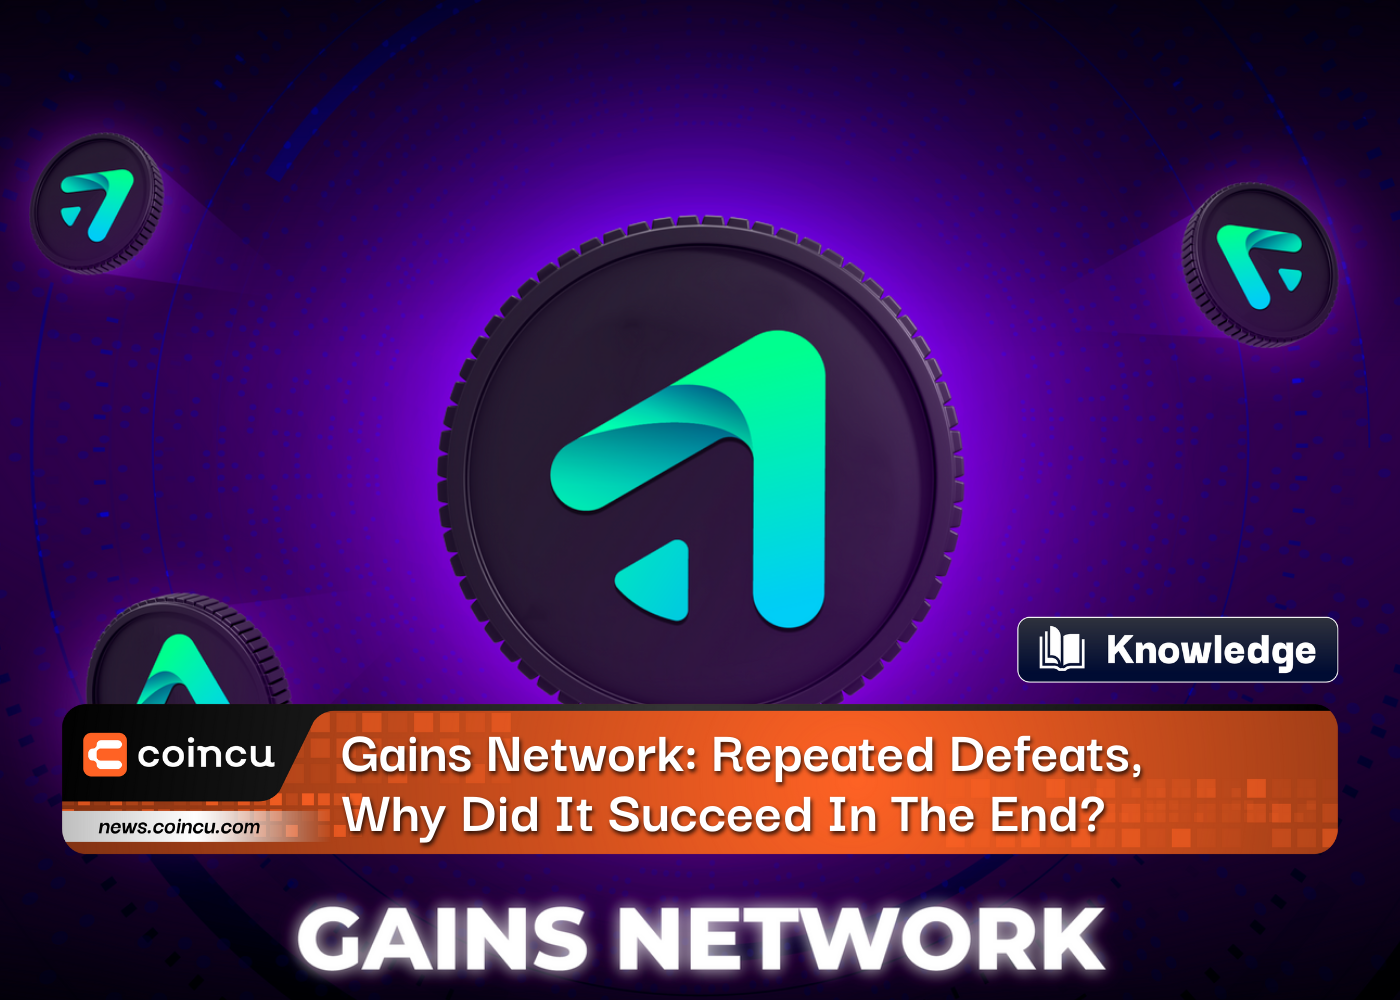 Gains Network: Repeated Defeats, Why Did It Succeed In The End?